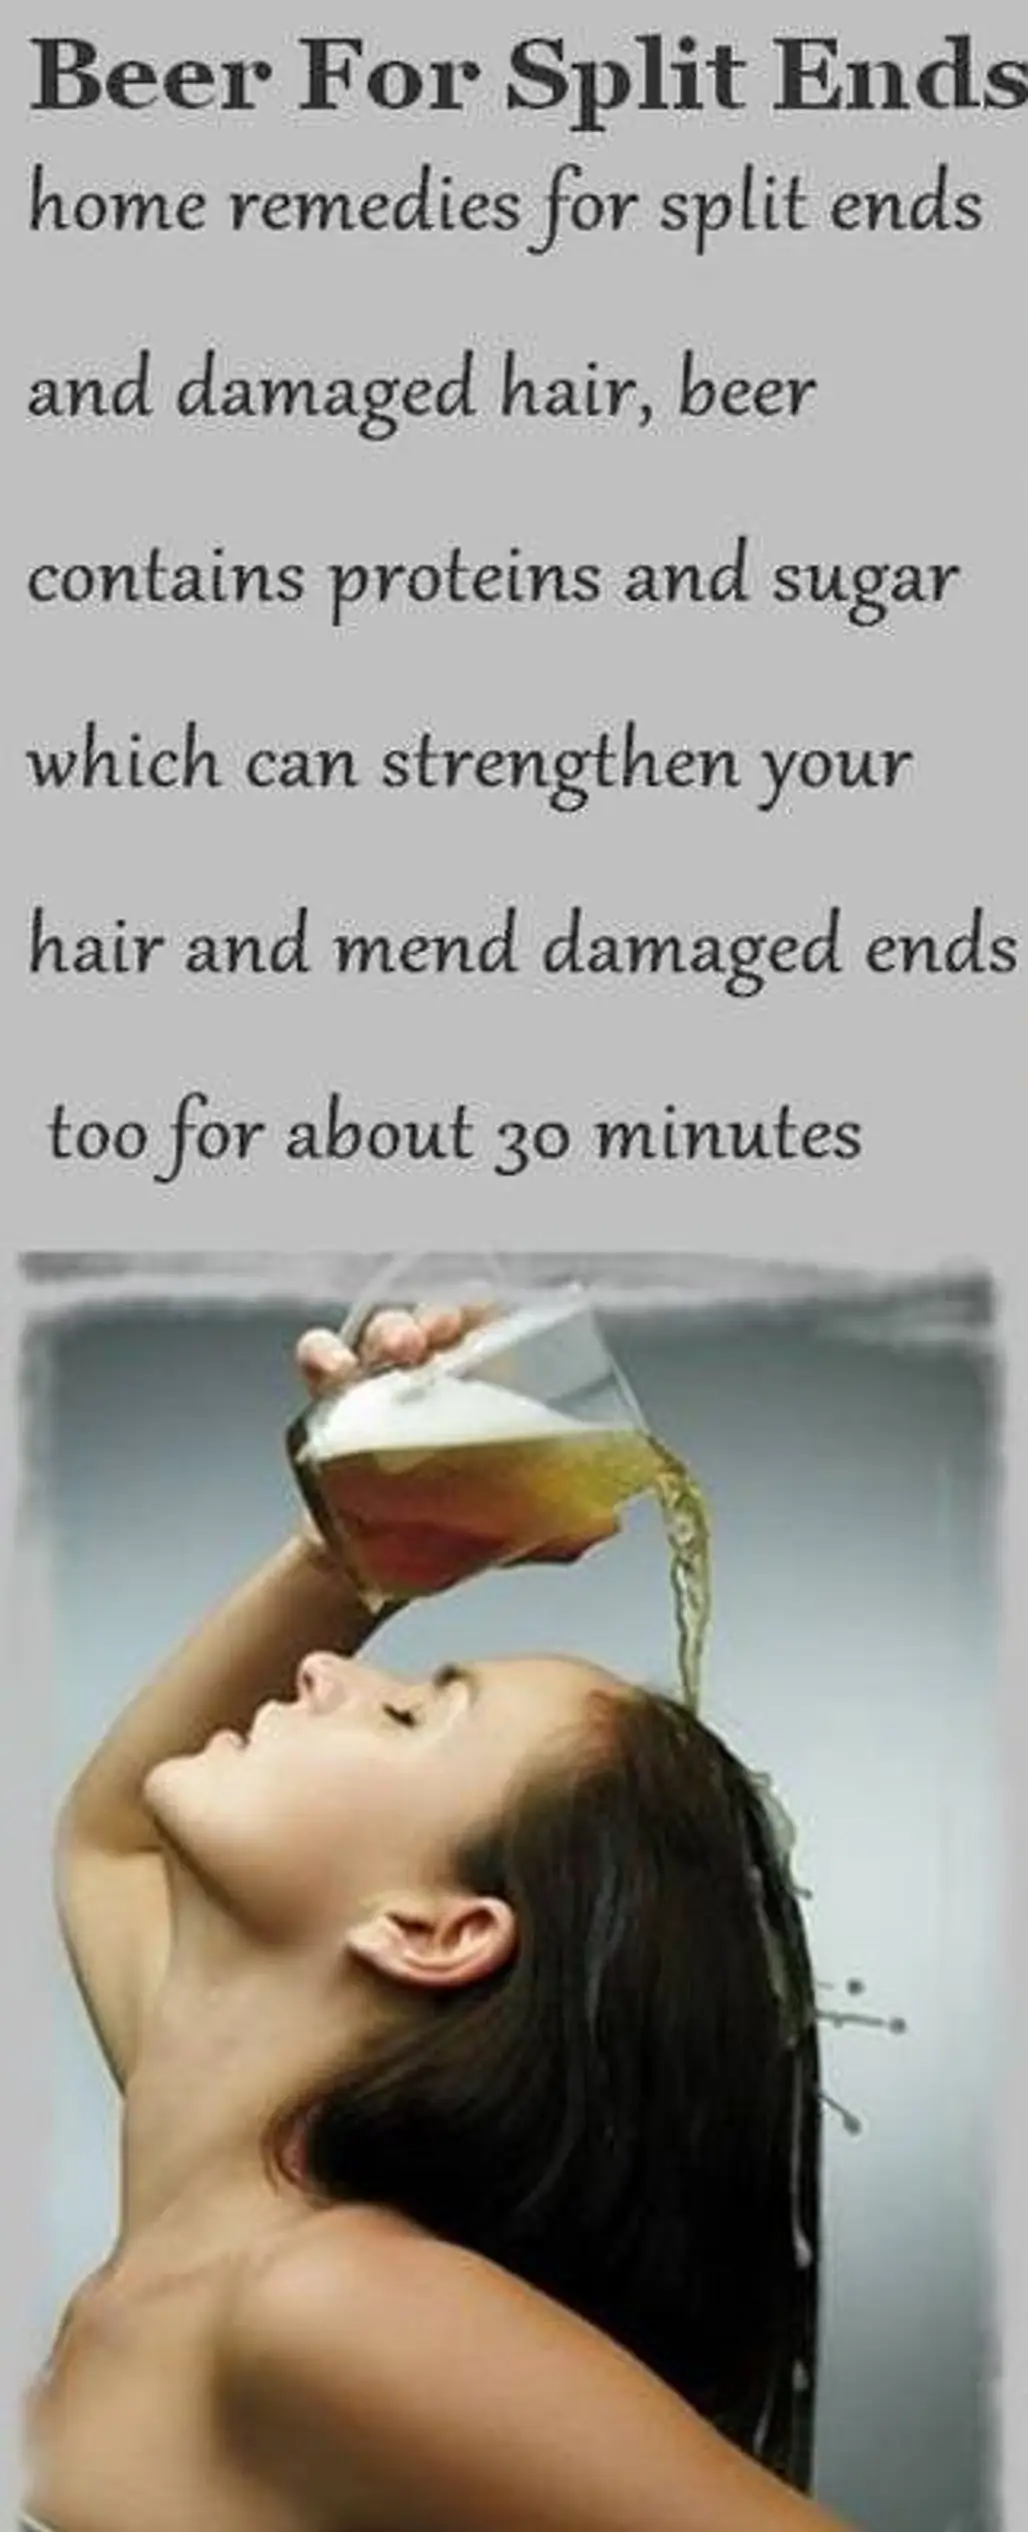 Beer Can Help Your Split Ends!